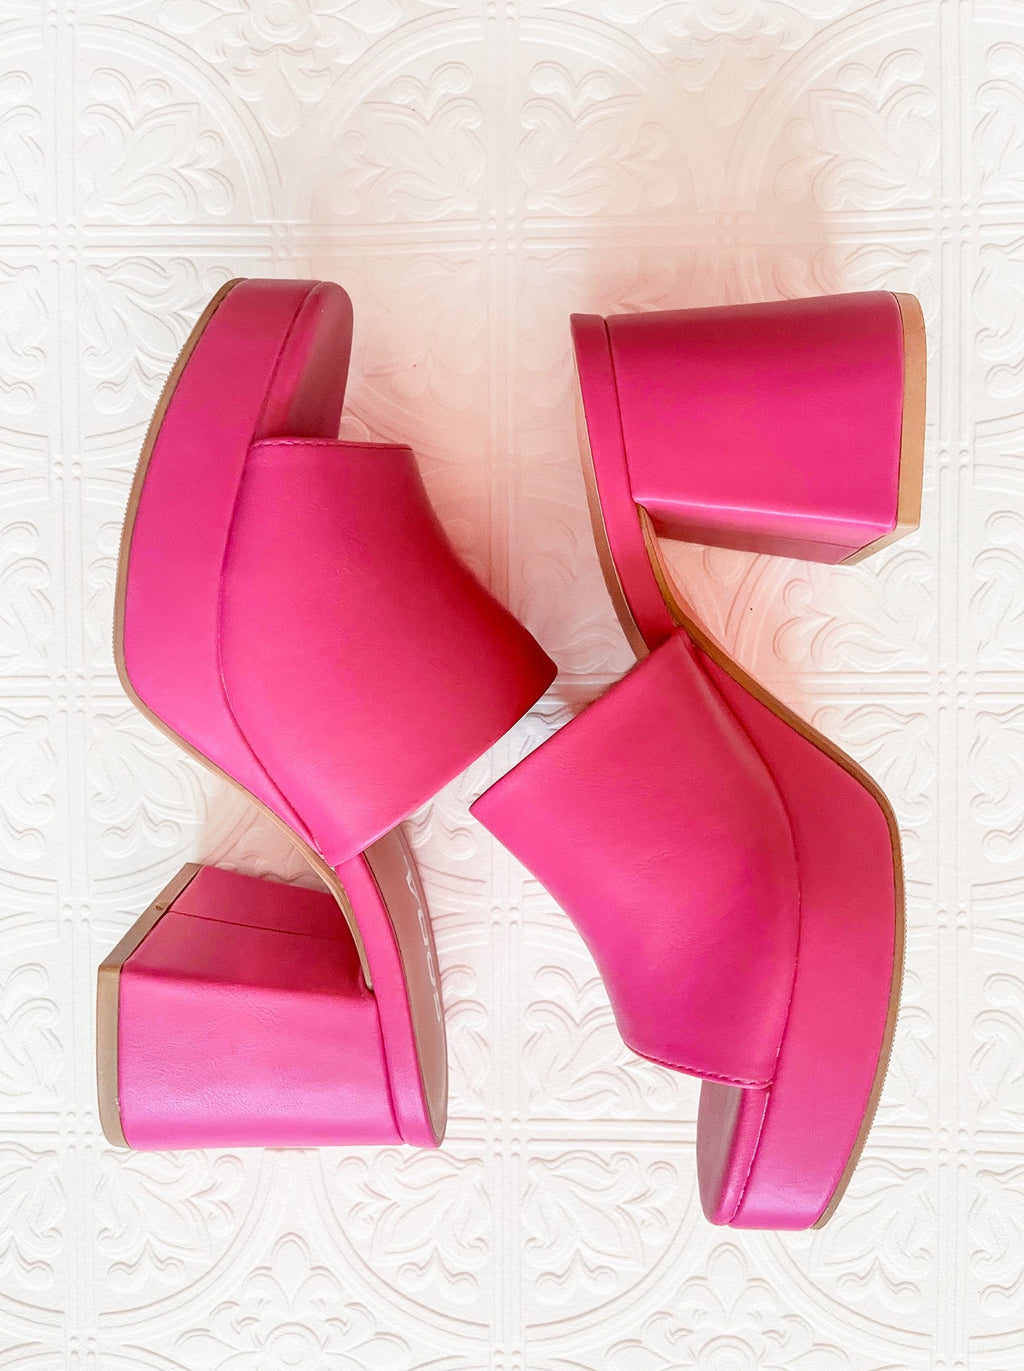 Path To Greatness Pink Heels